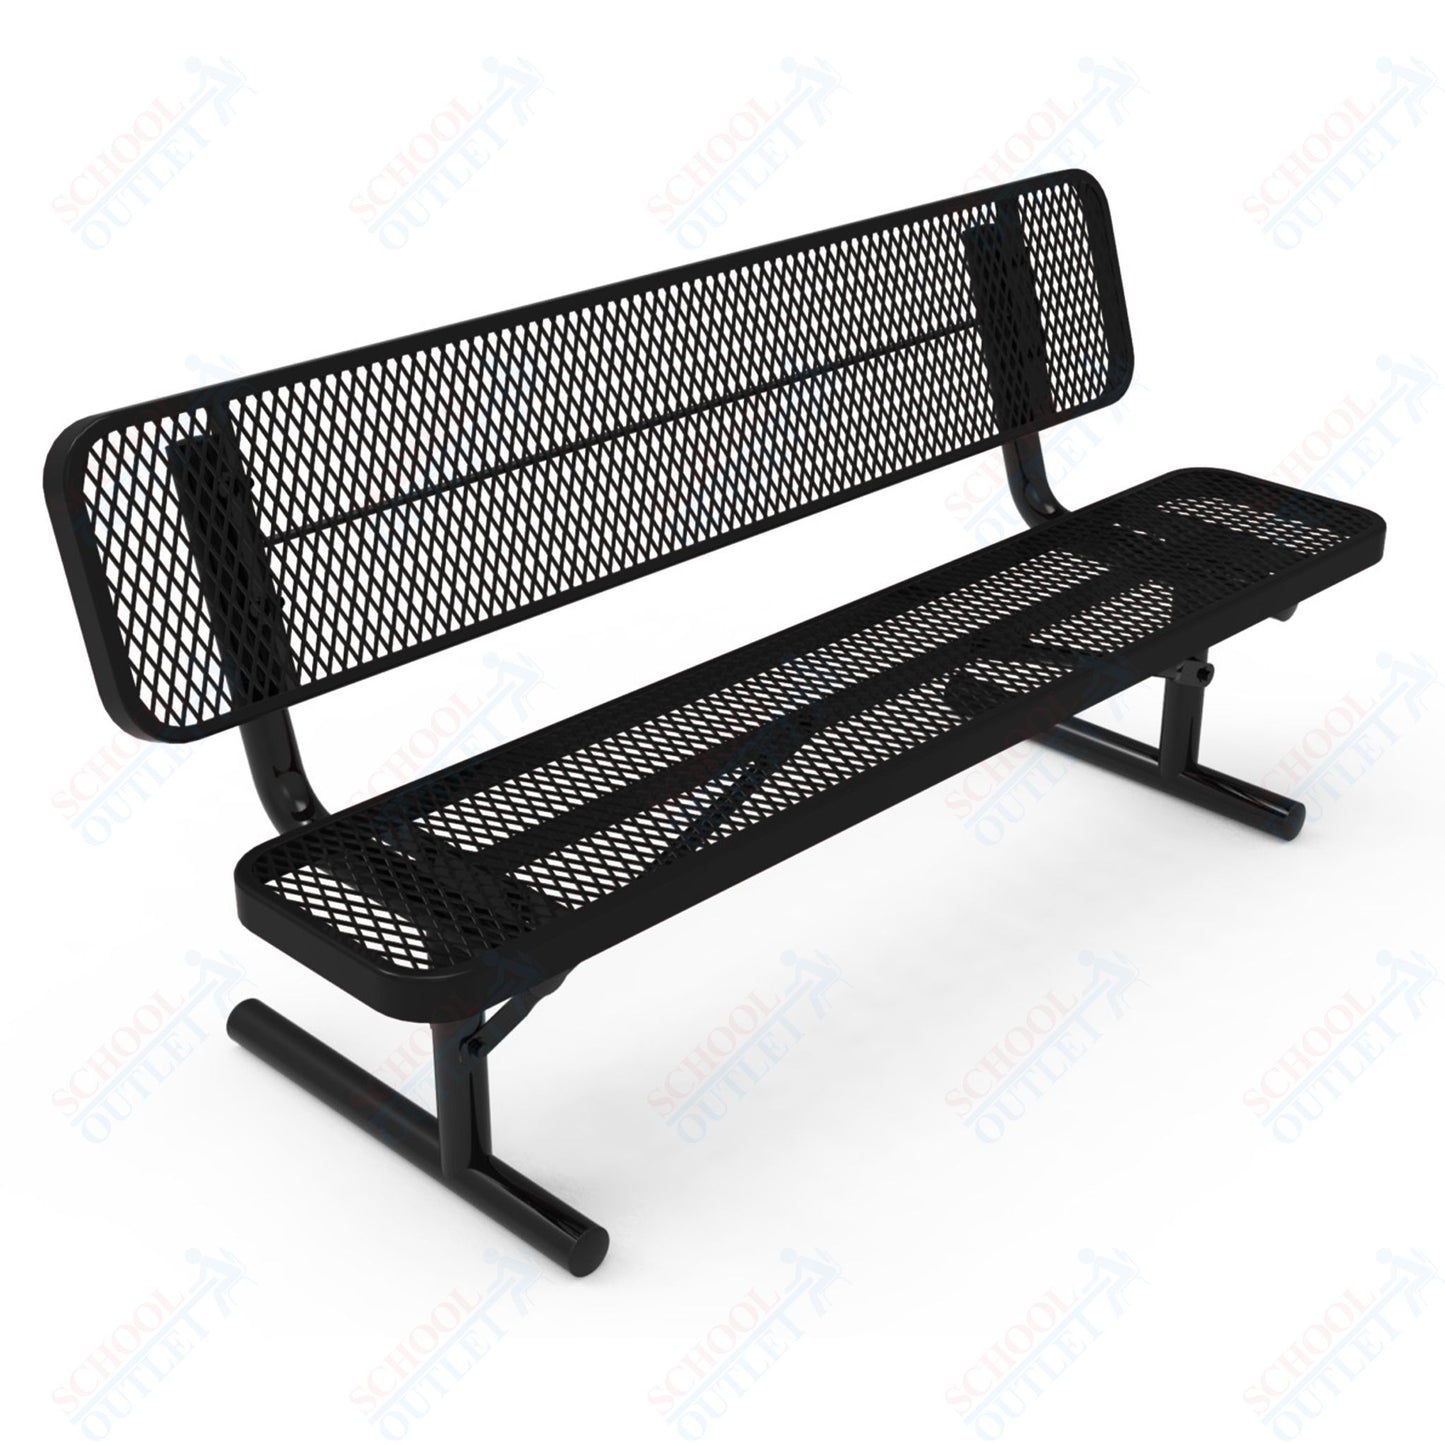 MyTcoat - Player's Outdoor Portable Bench with Back 4' L (MYT-BPY04-30)